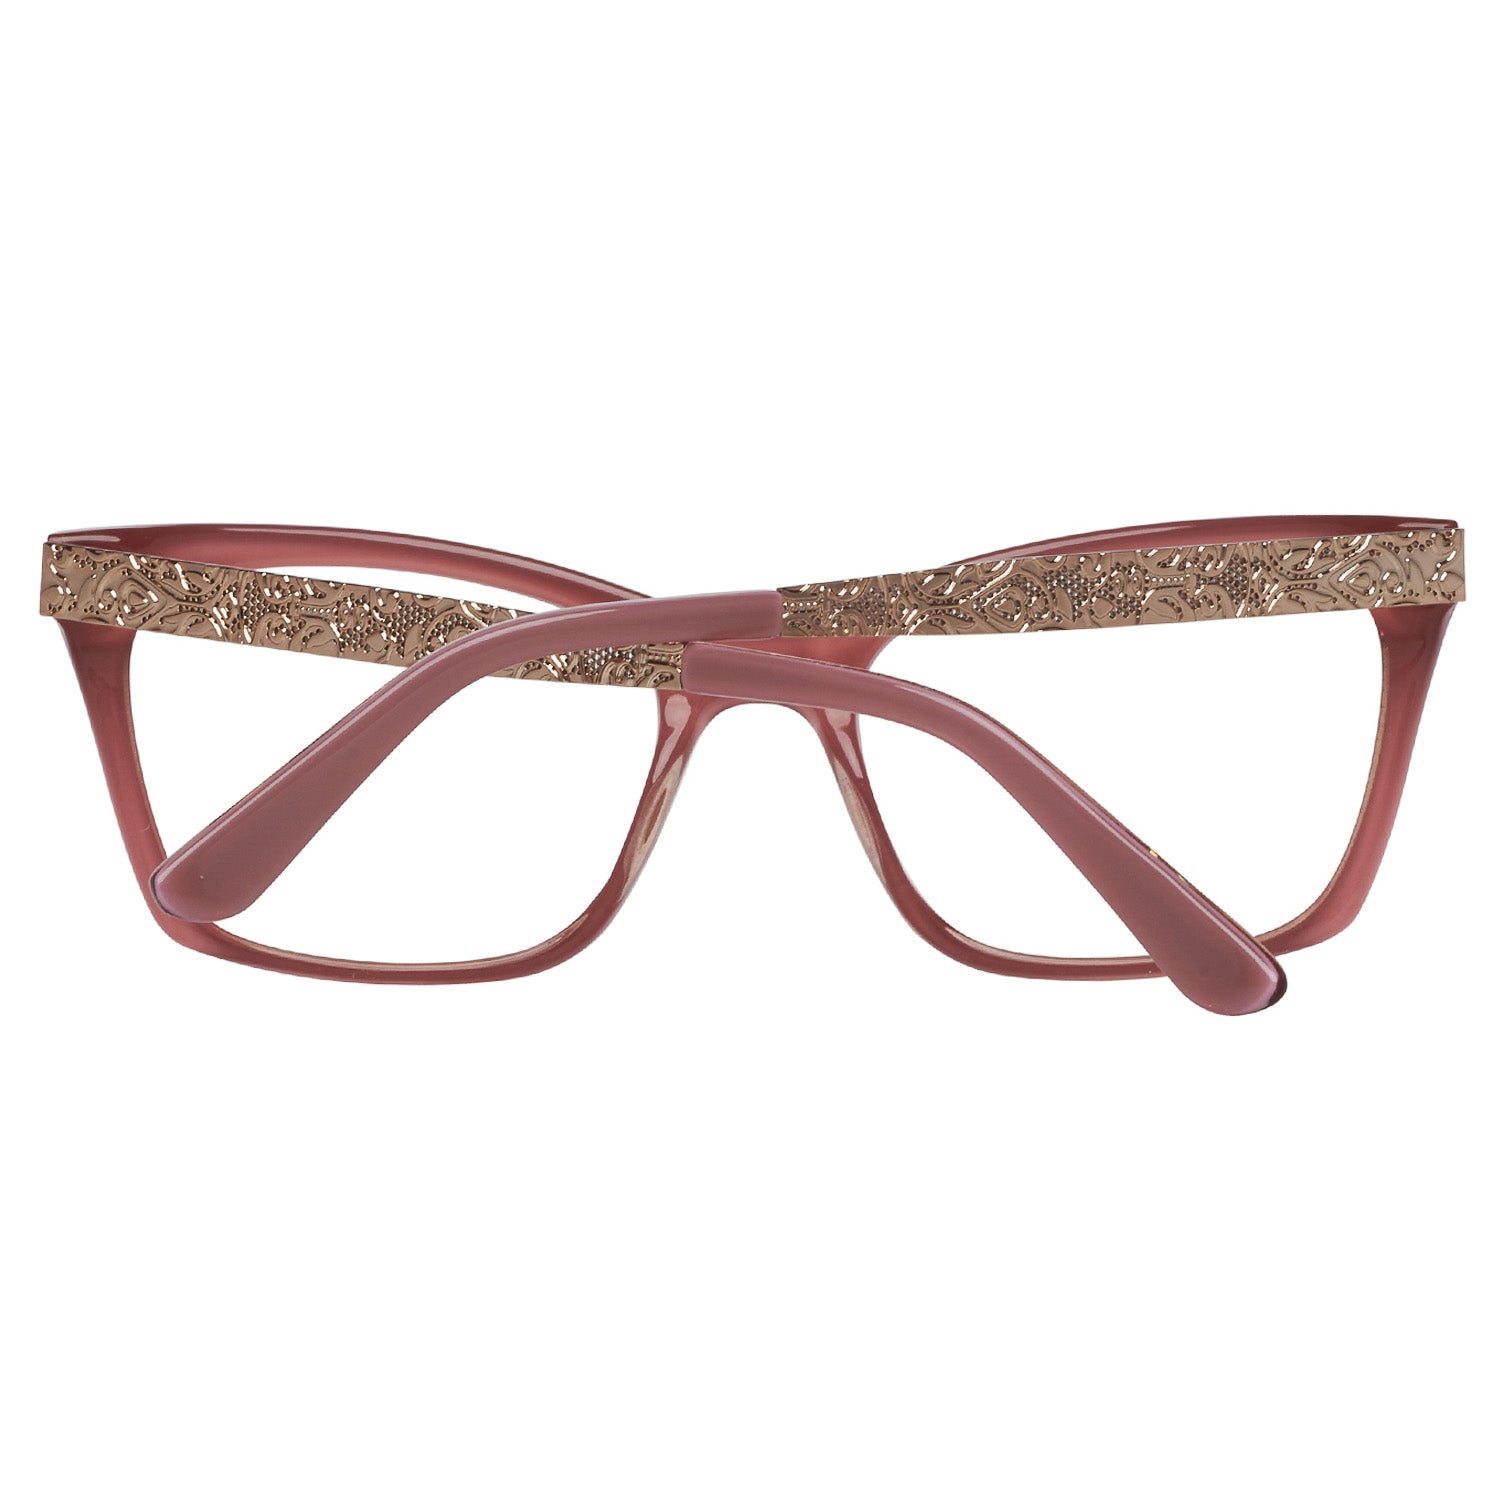 Marciano by Guess Frames Marciano by Guess Glasses Frames GM0267 072 53 Eyeglasses Eyewear UK USA Australia 